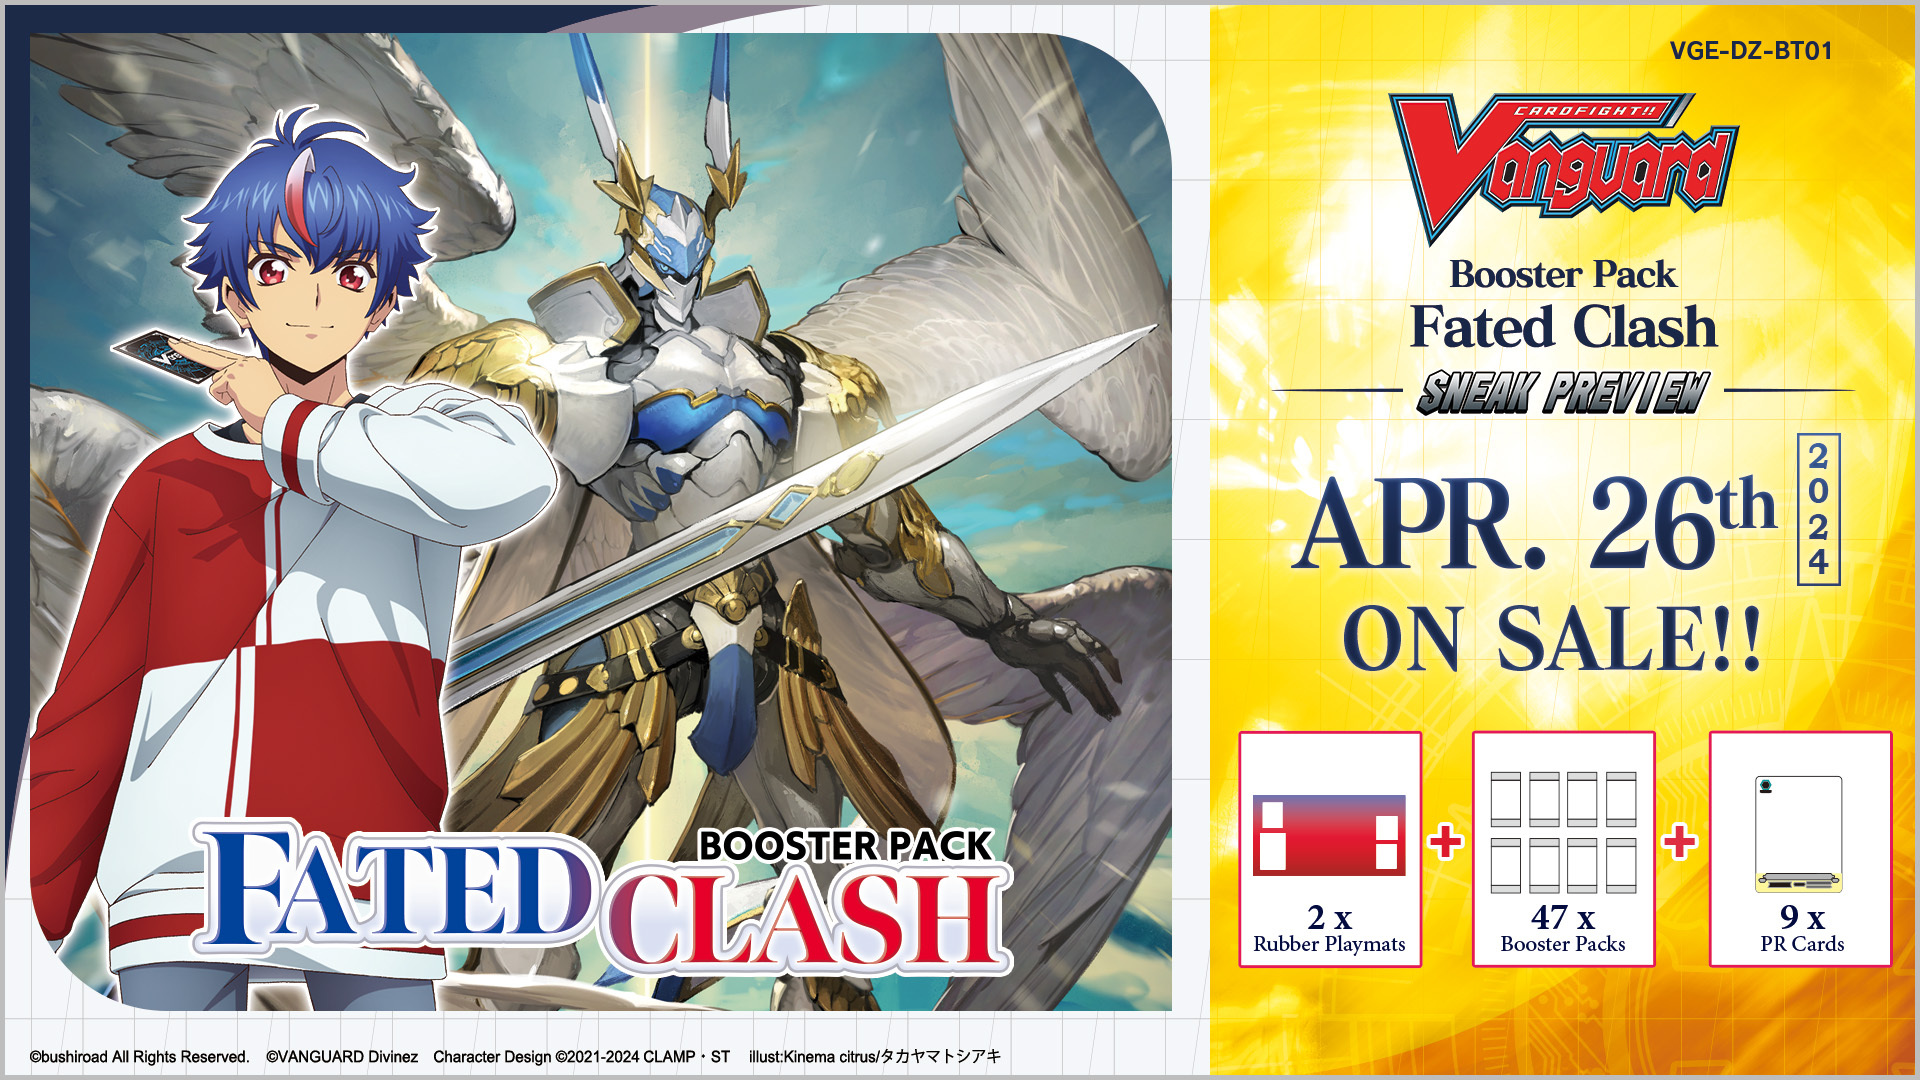 Cardfight!! Vanguard Booster Pack Fated Clash